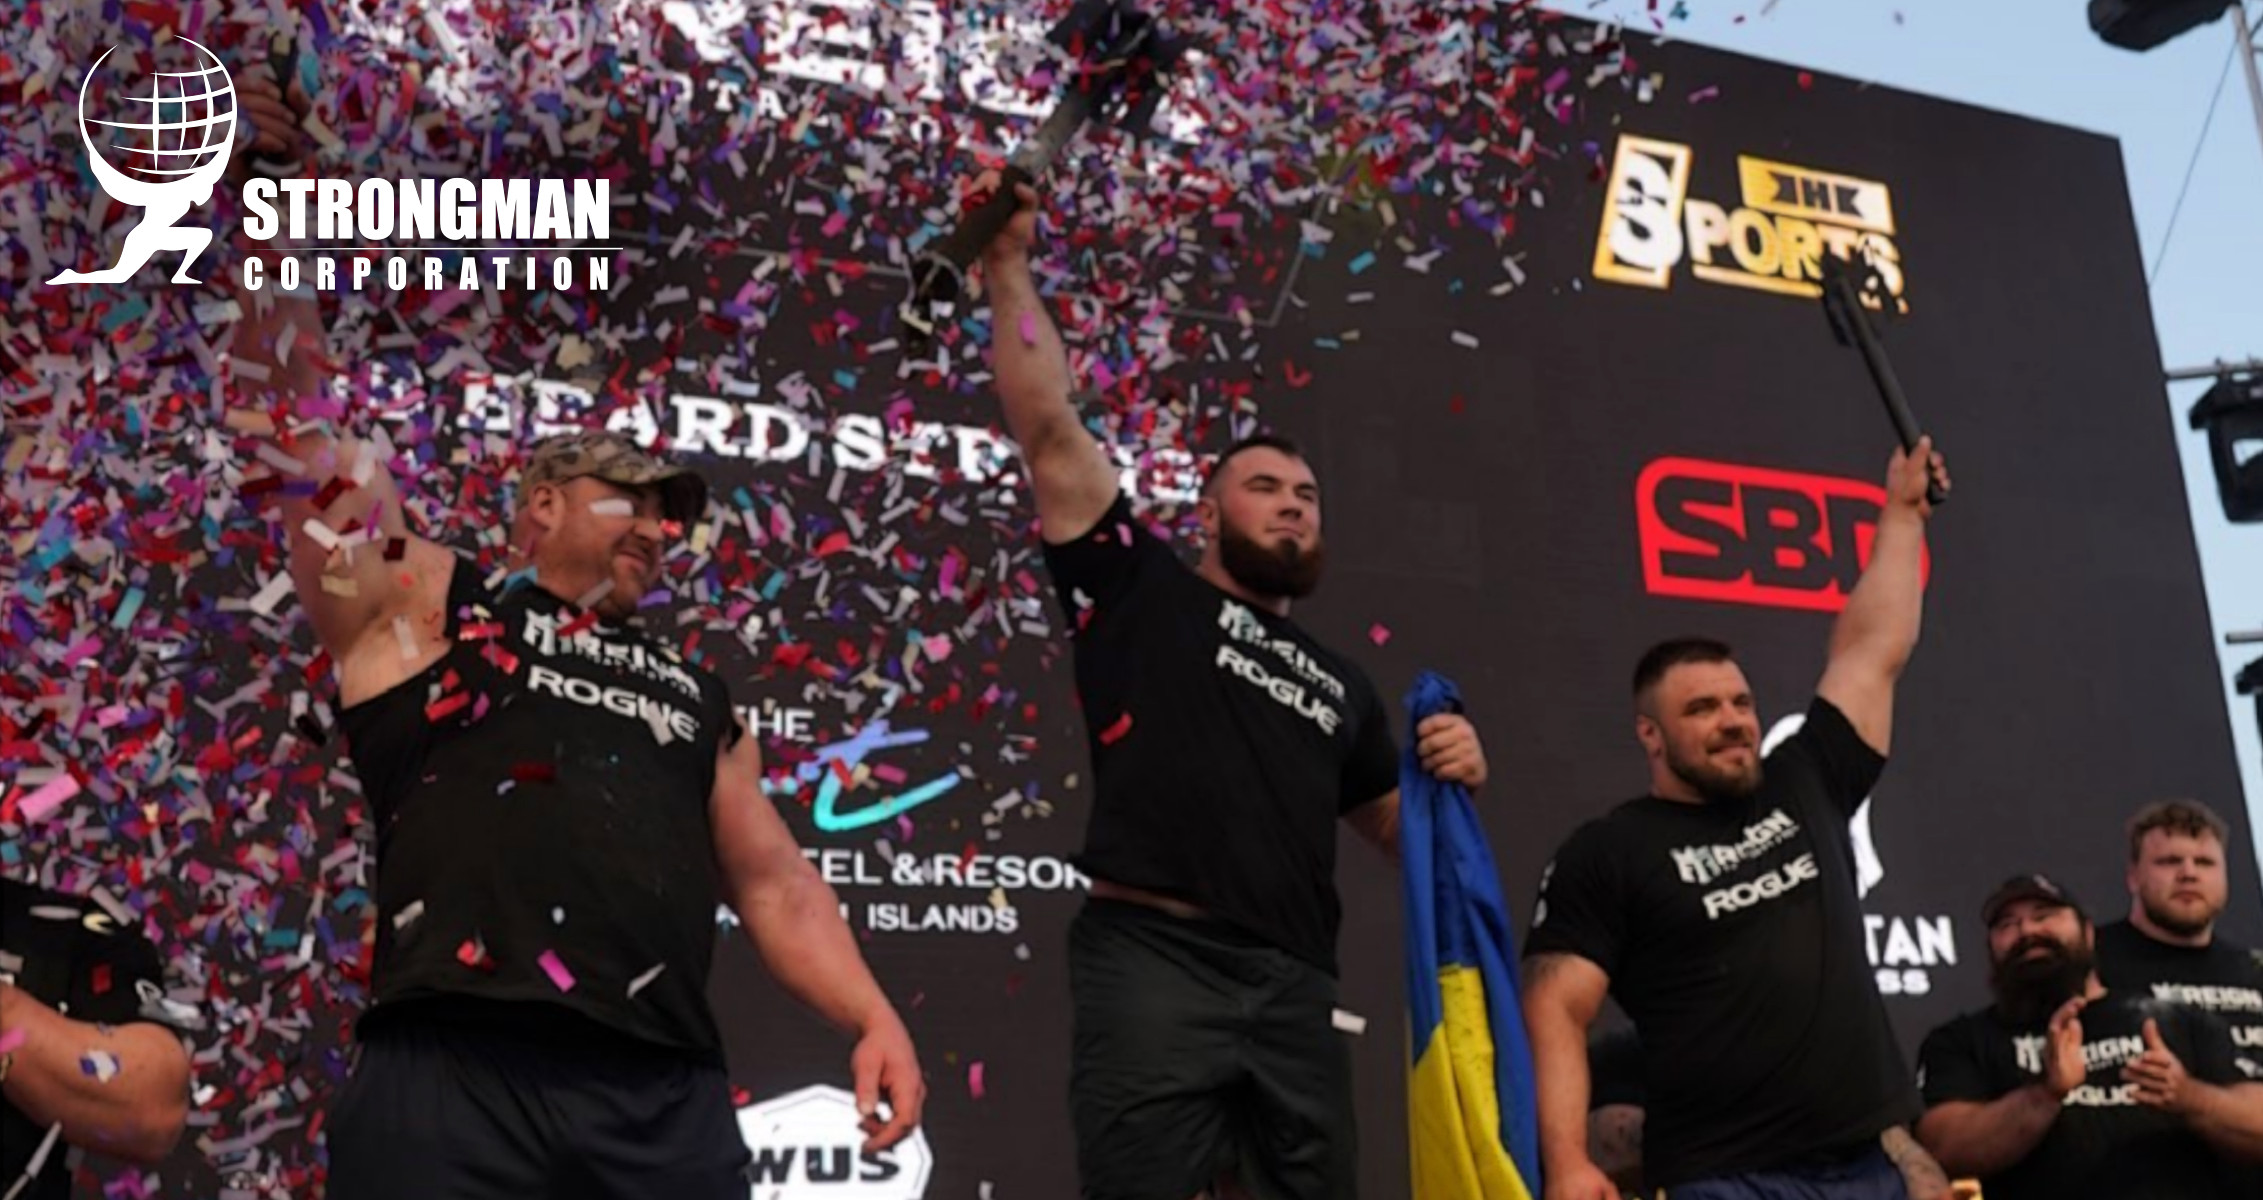 Oleksii Novikov Crushes the Competition at World's Ultimate Strongman